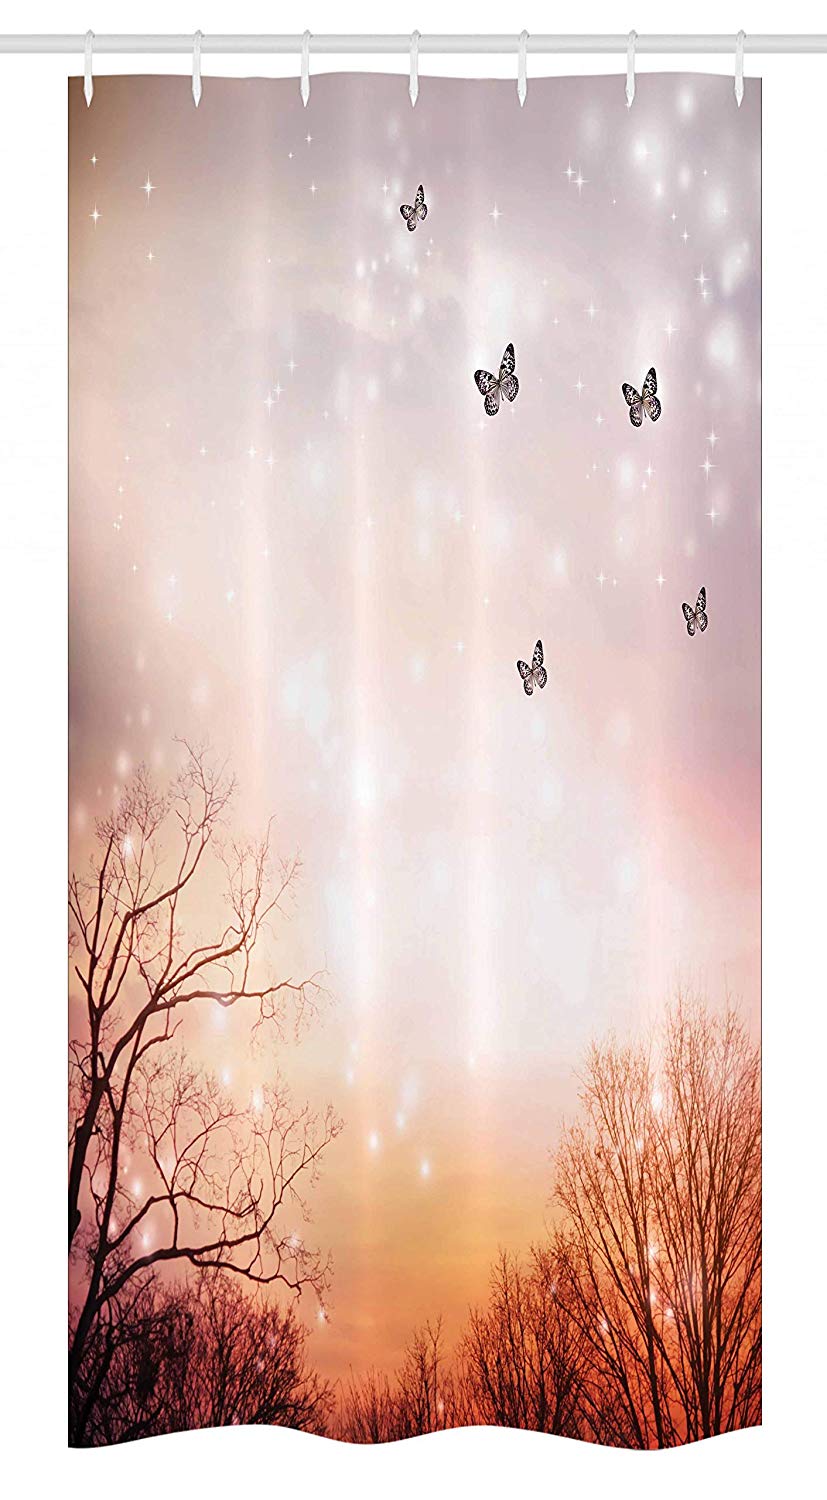 Ambesonne Butterfly Stall Shower Curtain, Dreamy Butterflies Over Trees Romantic Fantasy Blurry Sky Design, Fabric Bathroom Decor Set with Hooks, 36